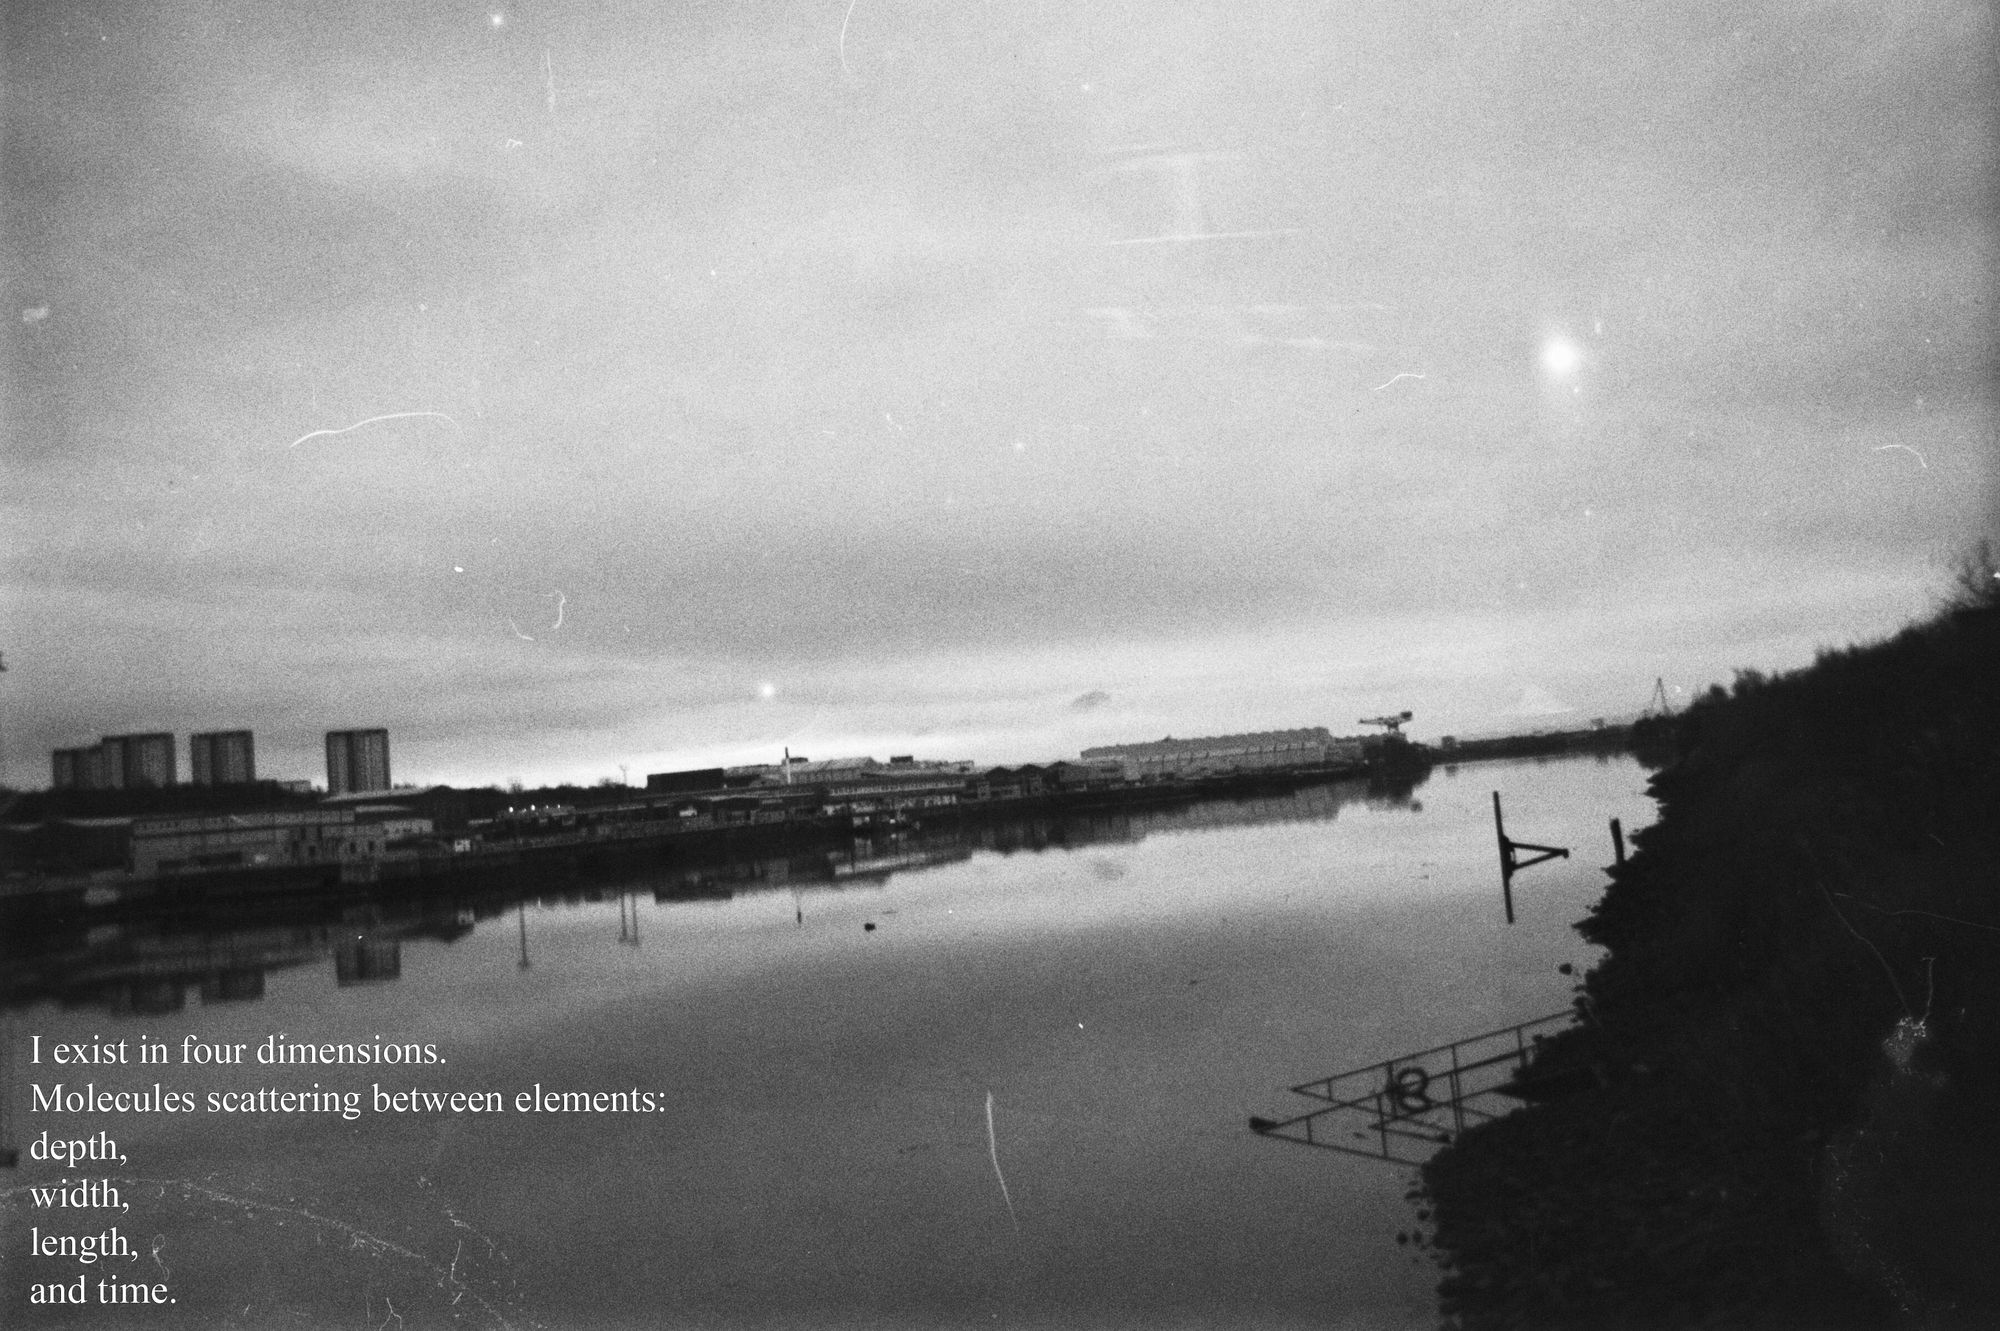 Black and white photograph of a harbour. A river in the centre surrounded by buildings and dark shadows. White poetic text in the foreground.